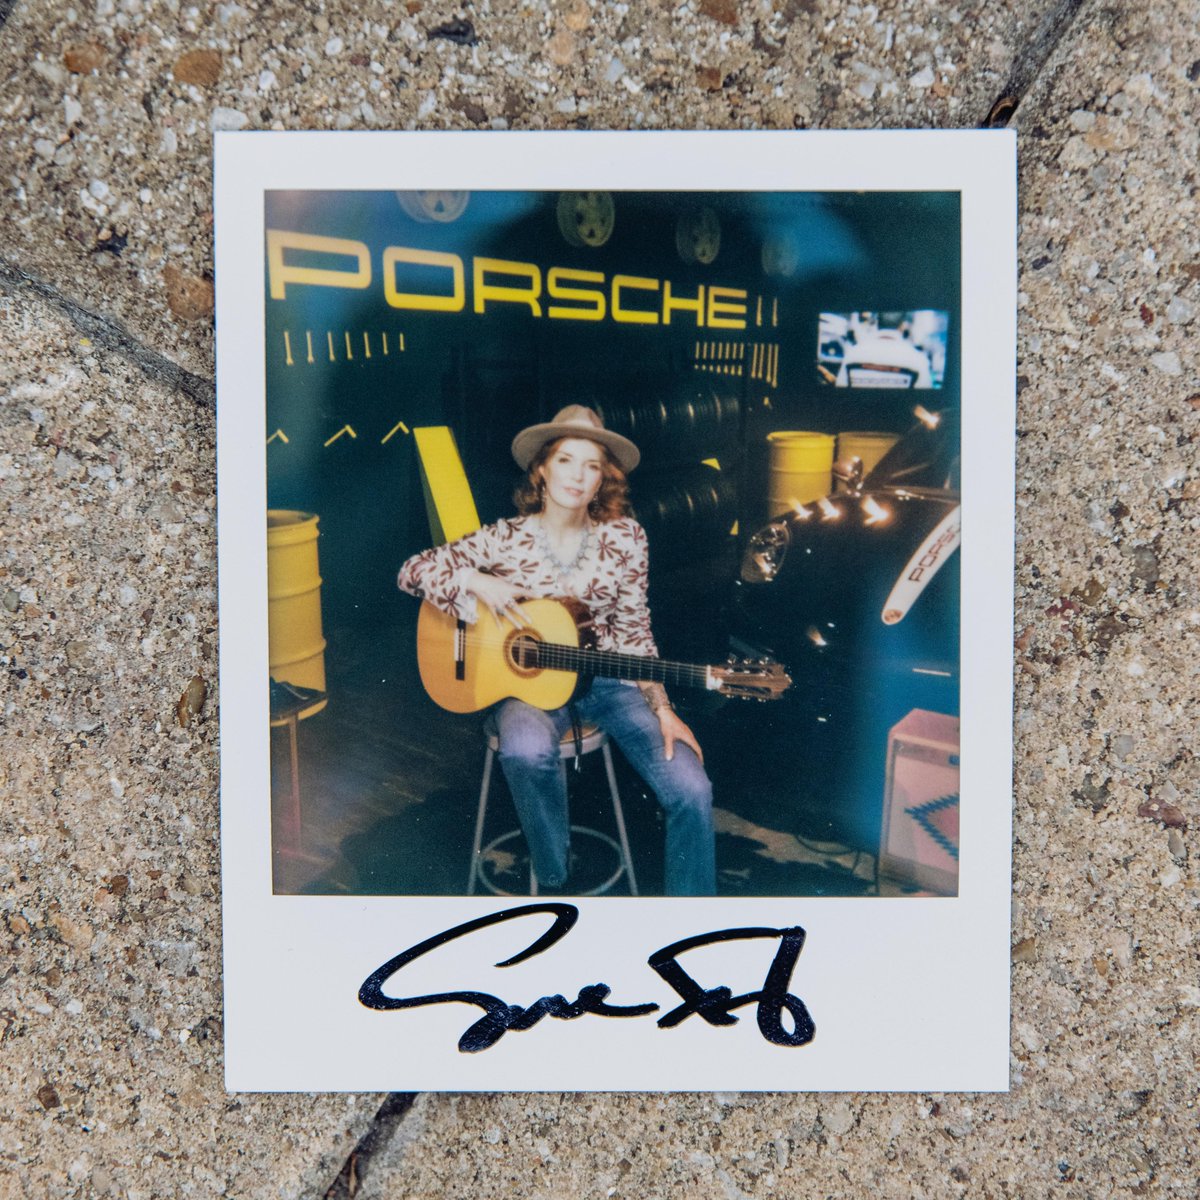 Ferry's Garage was the perfect setting to listen to a few jams. The Tiny Garage concerts sponsored by @Bose brought the energy to Porsche Full Service. Thanks to the incredible artists who shared their sound. #PorscheFullService